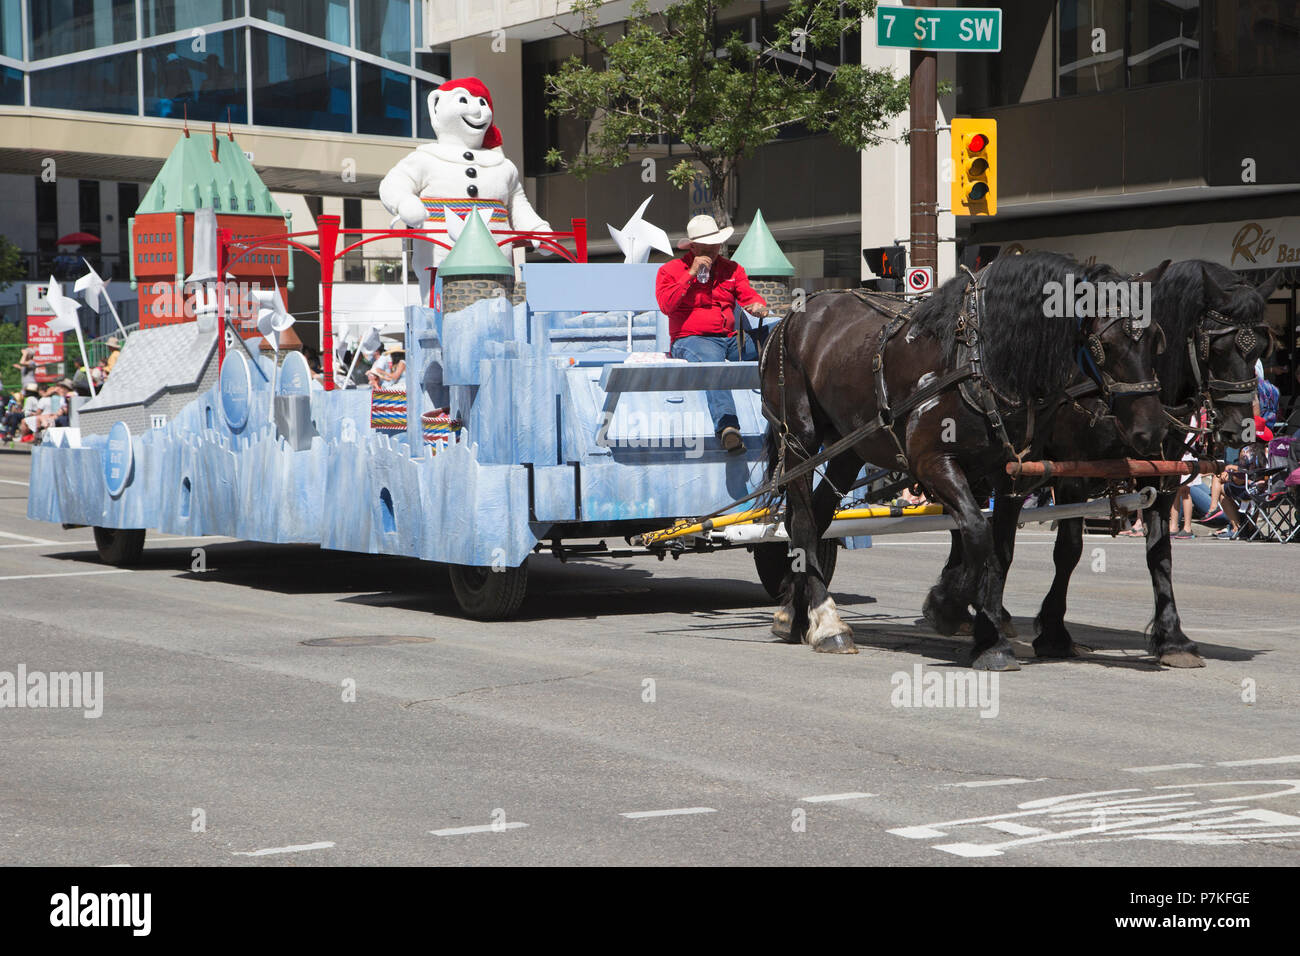 Calgary, Canada. 6th July, 2018.  Carnaval de Quebec float is pulled by a team of draft horses in the Calgary Stampede Parade. The parade through downtown kicks off the Calgary Stampede each year. Rosanne Tackaberry/Alamy Live News Stock Photo